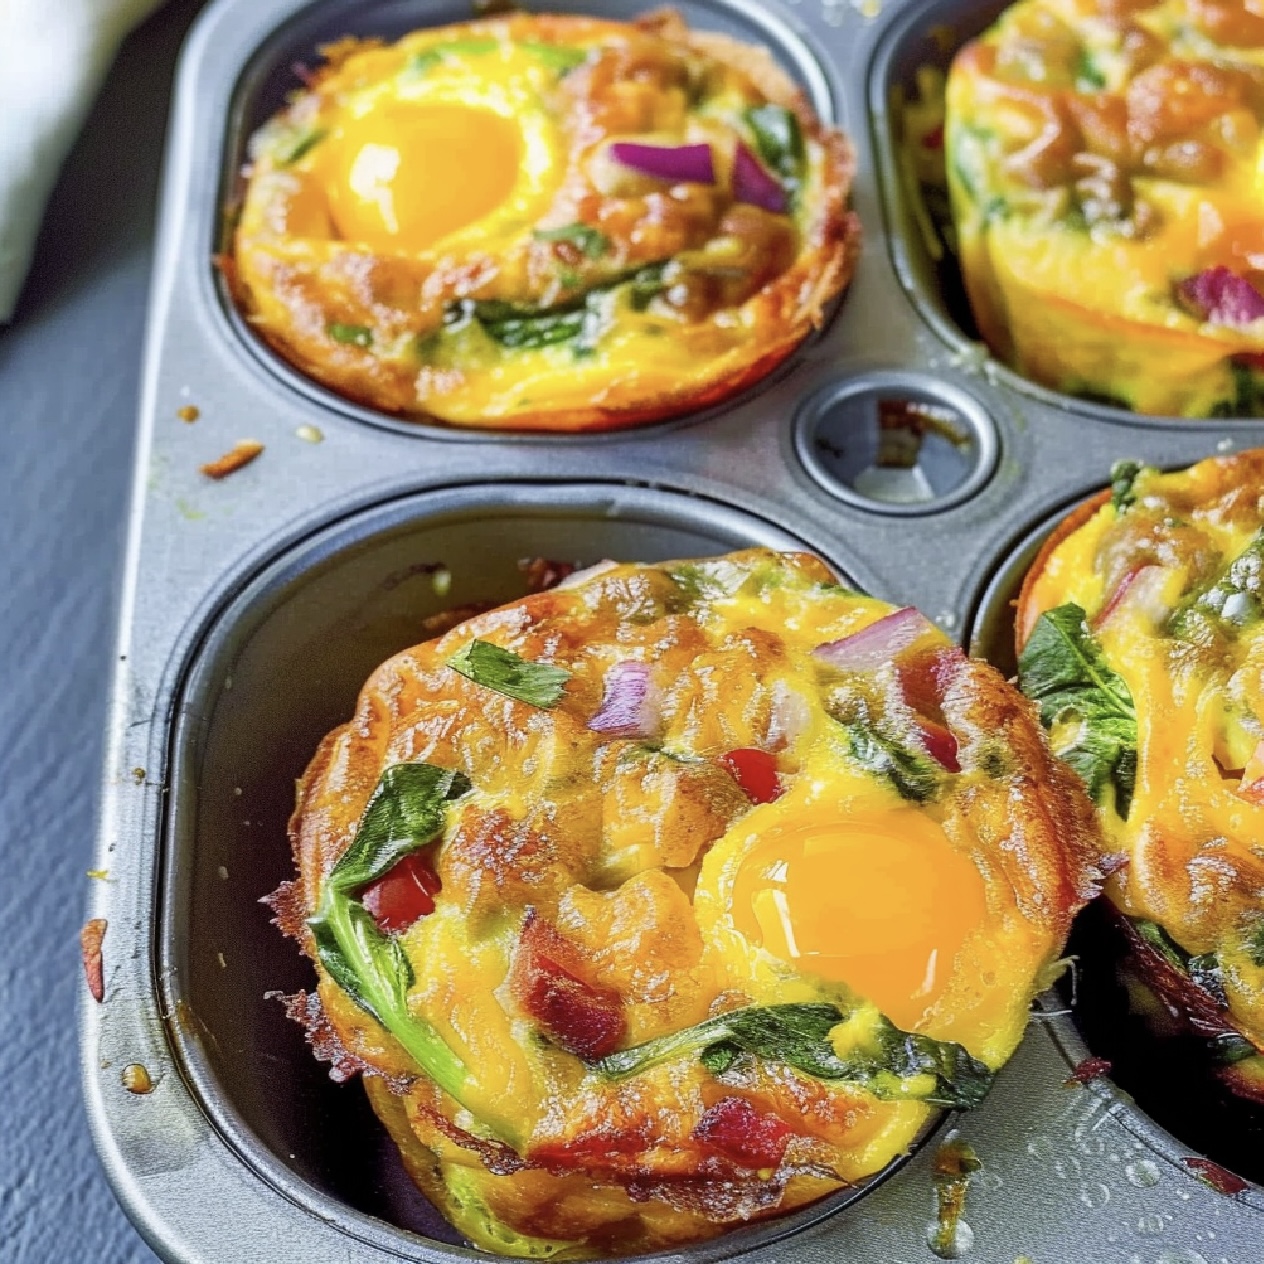 Prep once, eat healthy all week with these delicious and nutritious high-protein egg muffins. Perfect for breakfast or a snack!